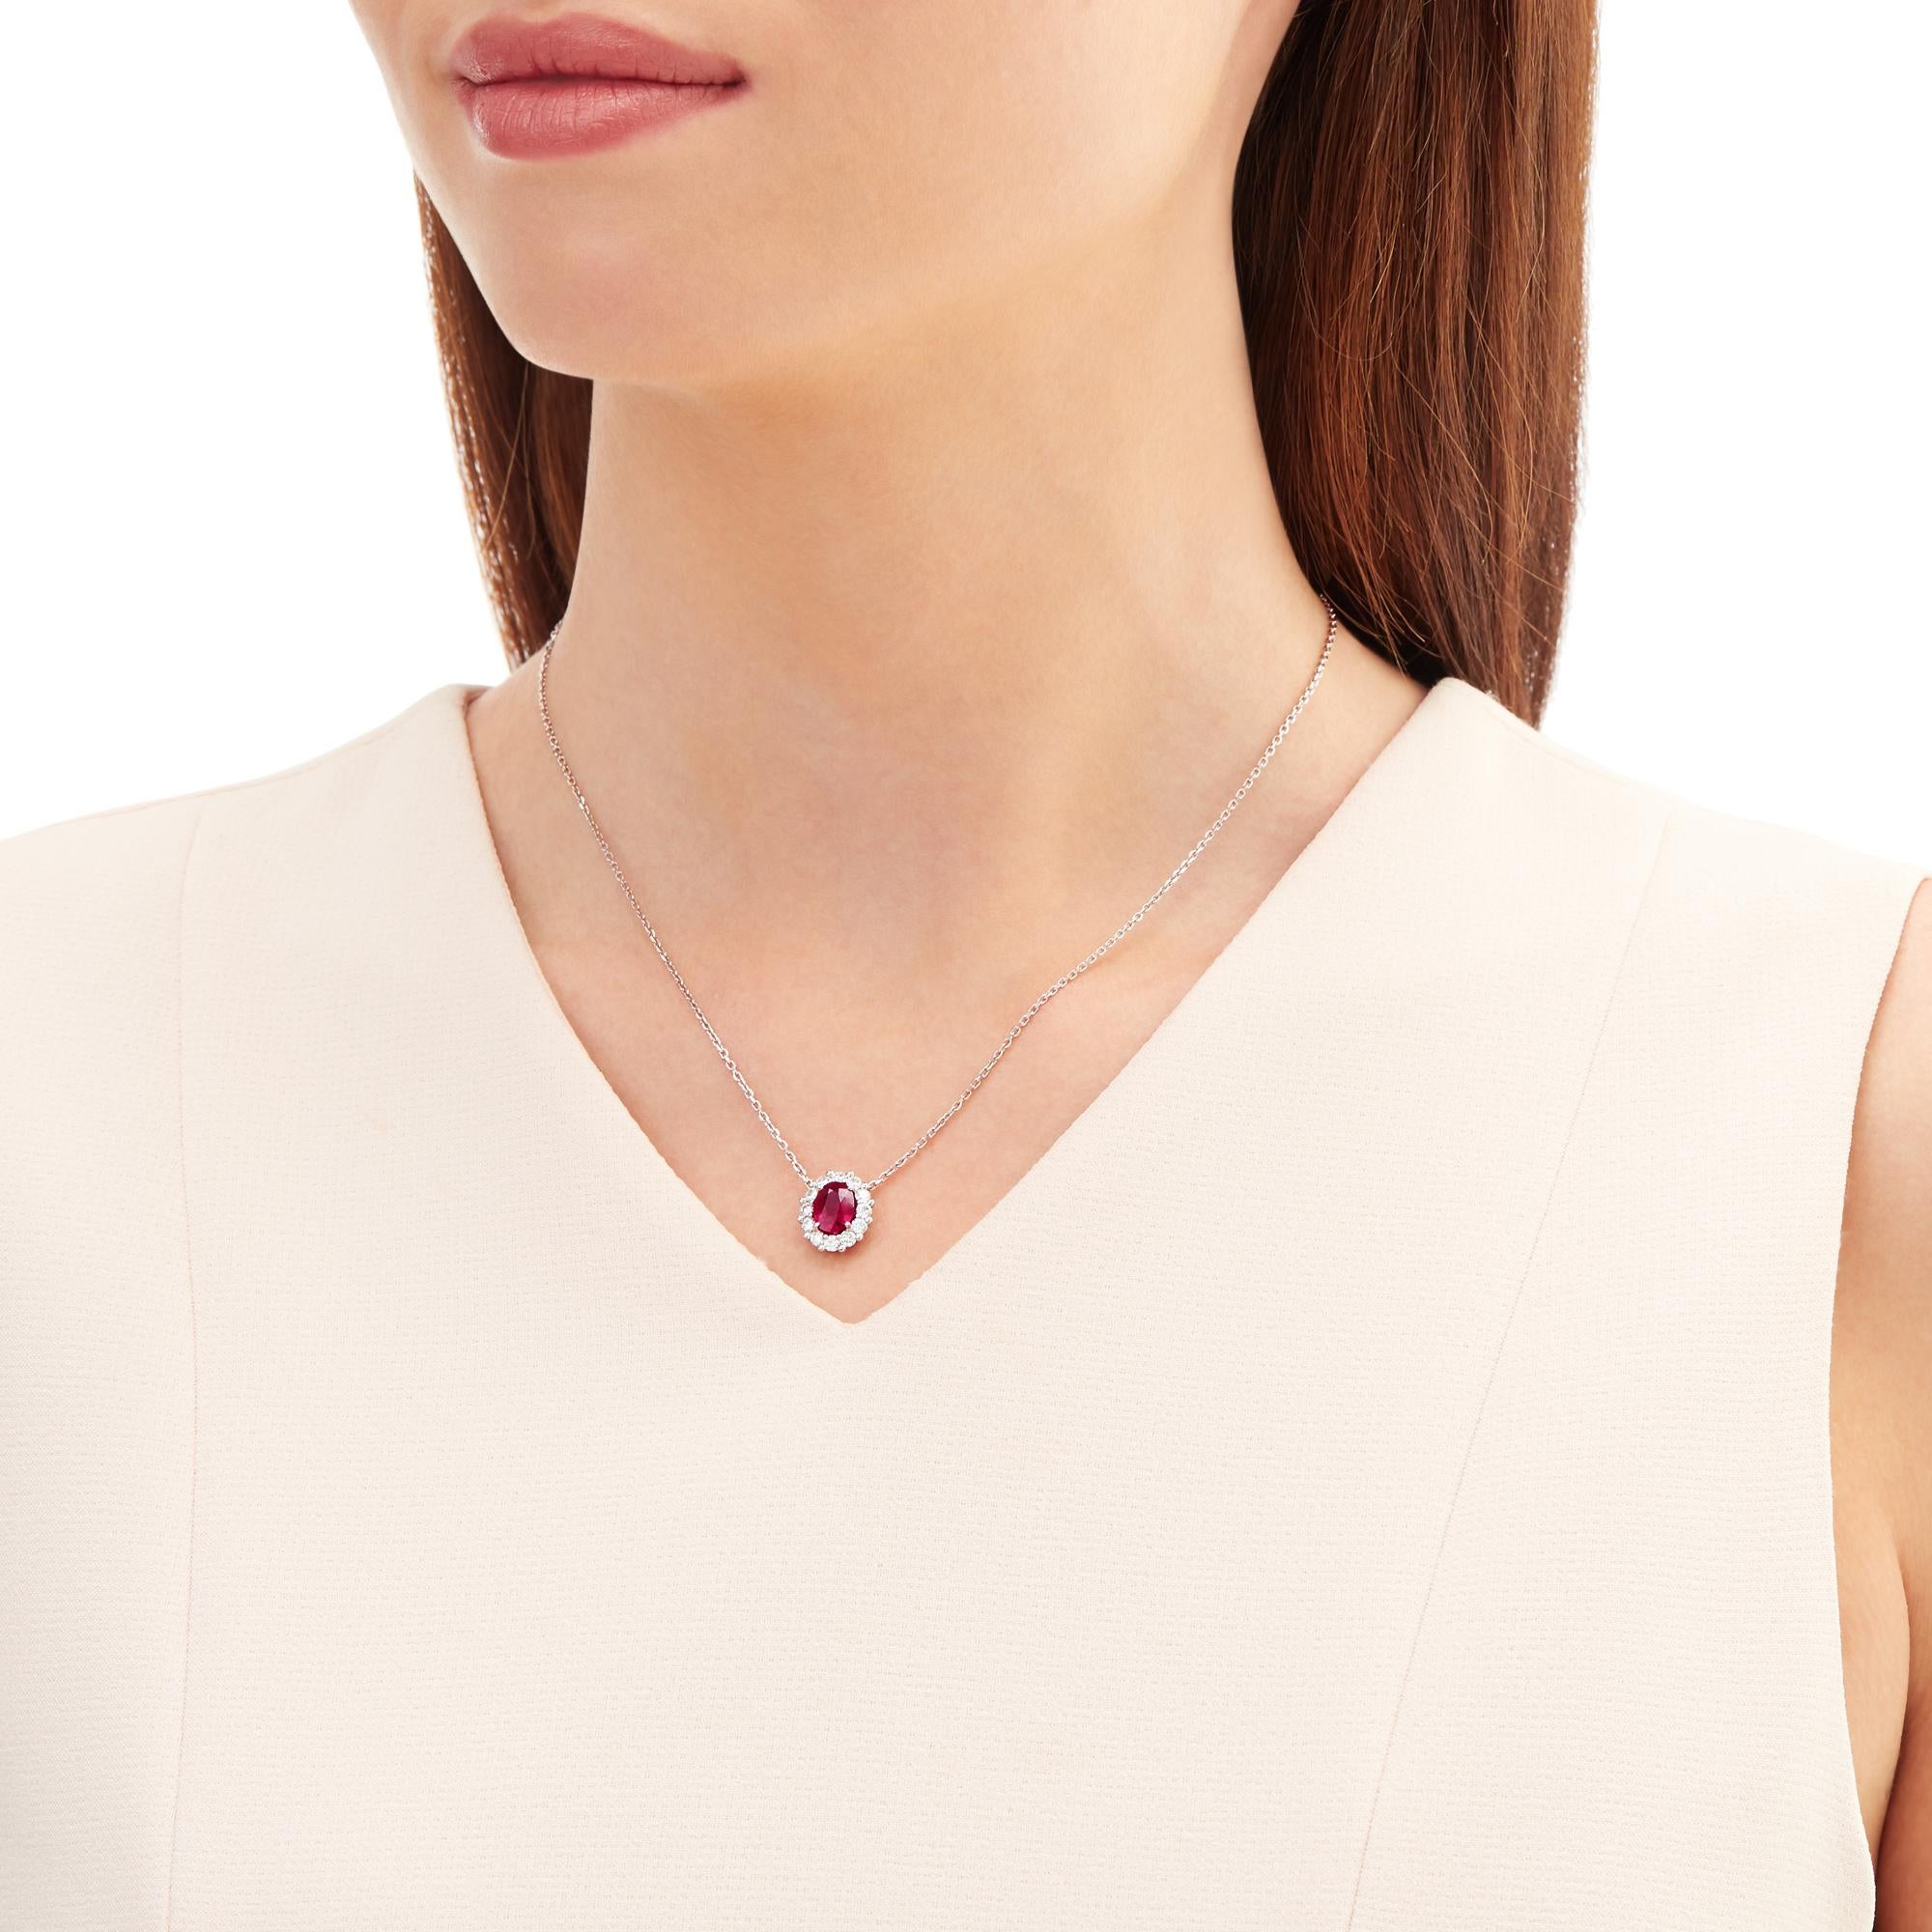 A House of Garrard platinum pendant from the 1735 collection set with a central oval ruby weighing 1.57 carats and 12 round white diamonds weighing 0.52 carats

1 central oval ruby weighing 1.57 carats. GIA certified; origin Mozambique
12 round